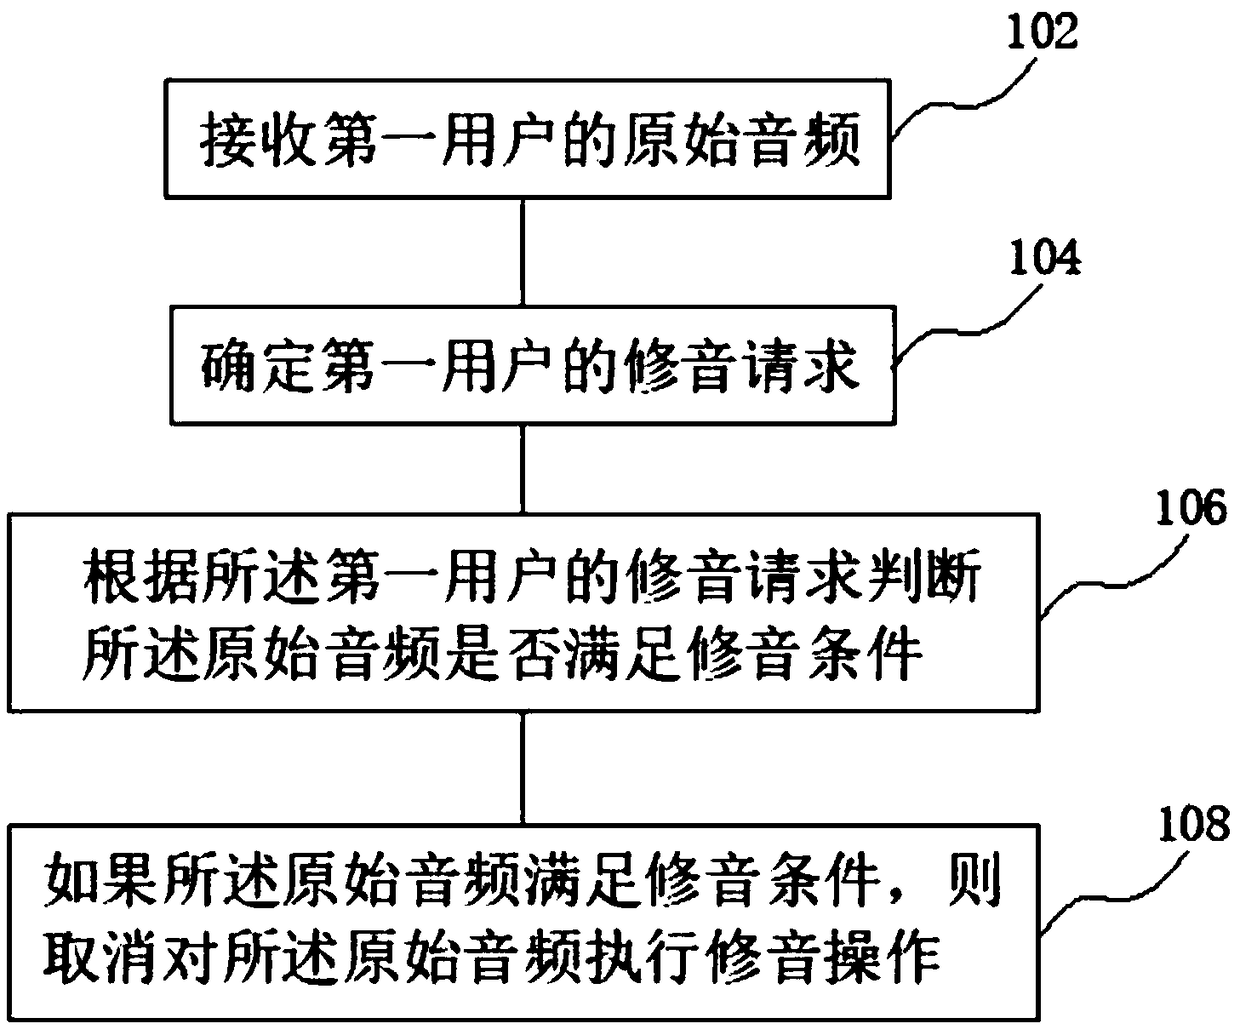 Sound correction control method and device